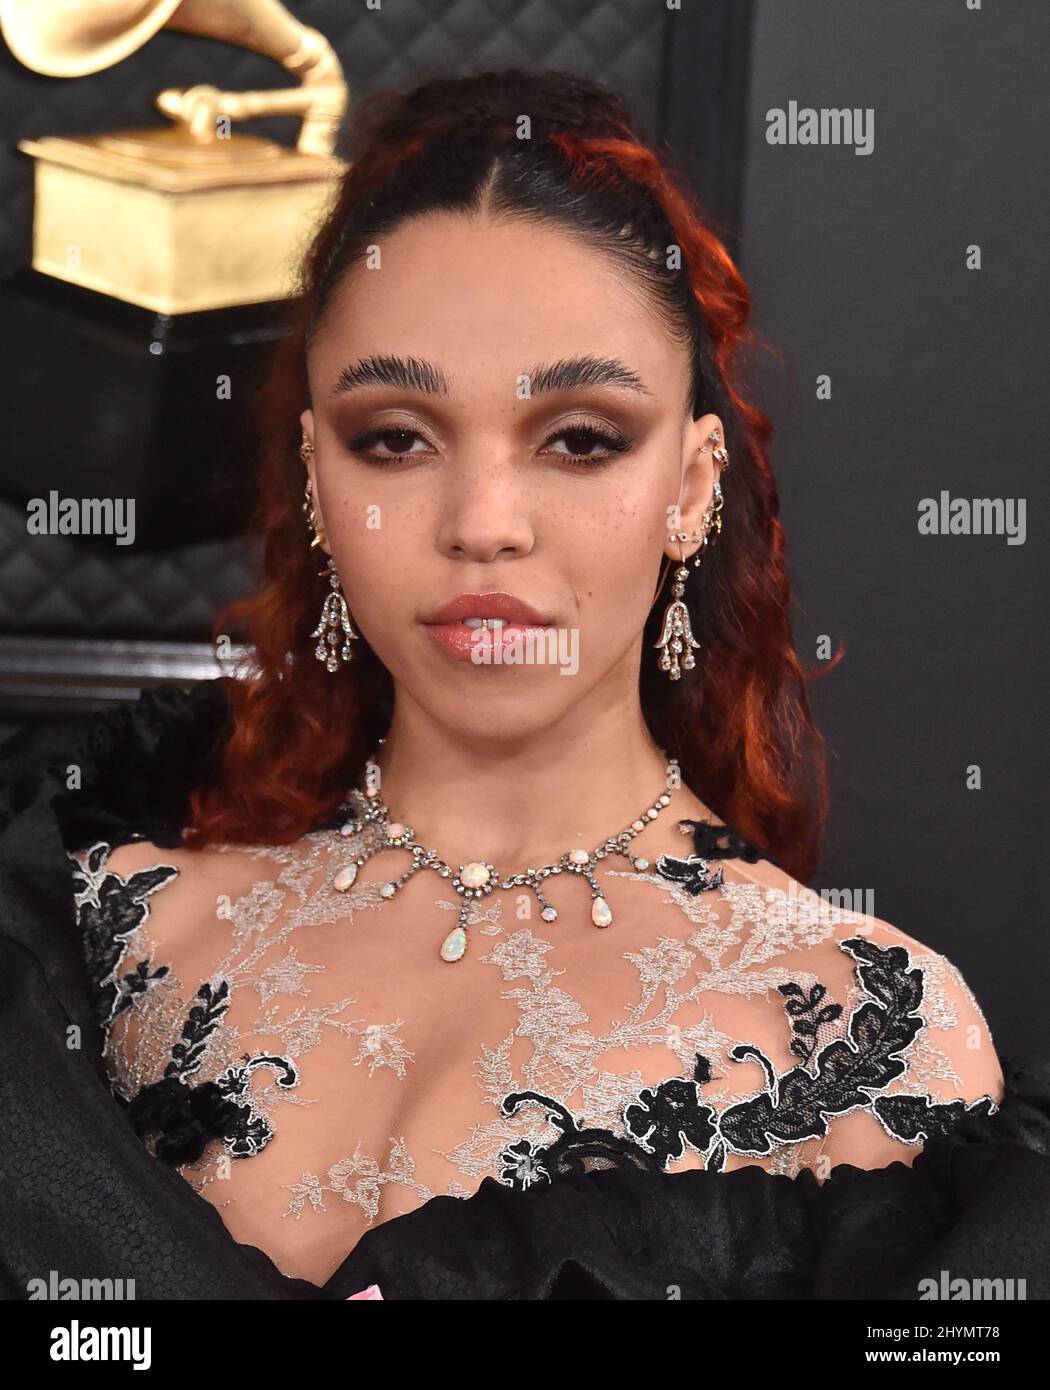 FKA twigs attending the 2020 GRAMMY Awards held at Staples Center in ...